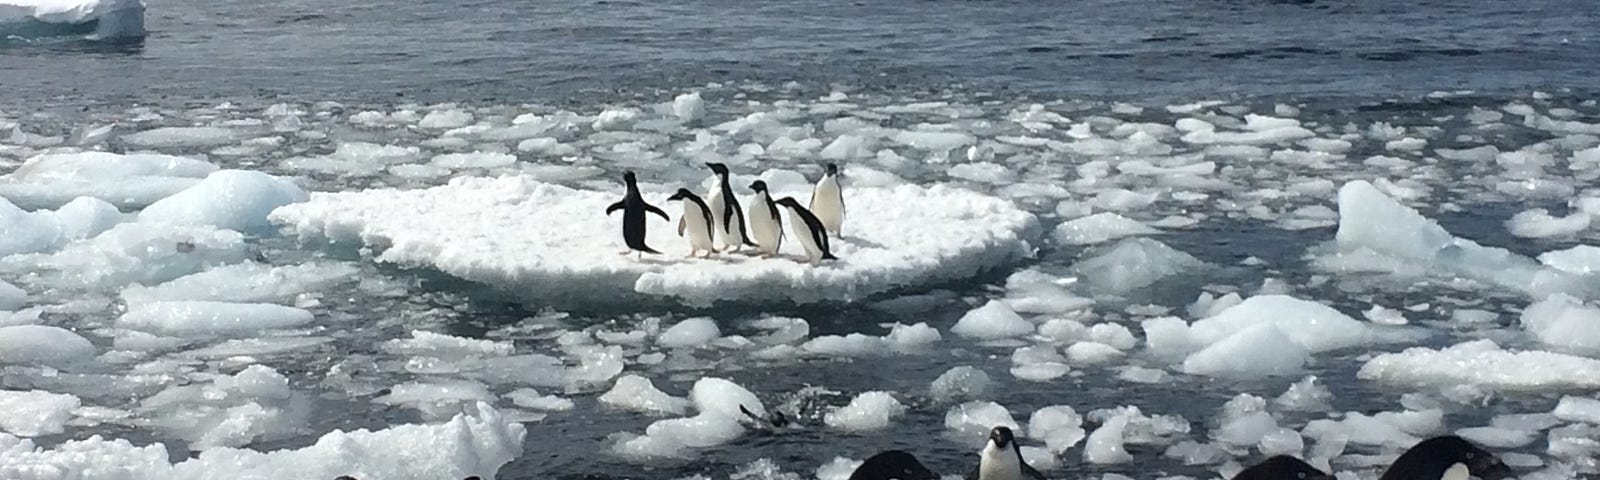 Penguins sitting on floating ice in the sea